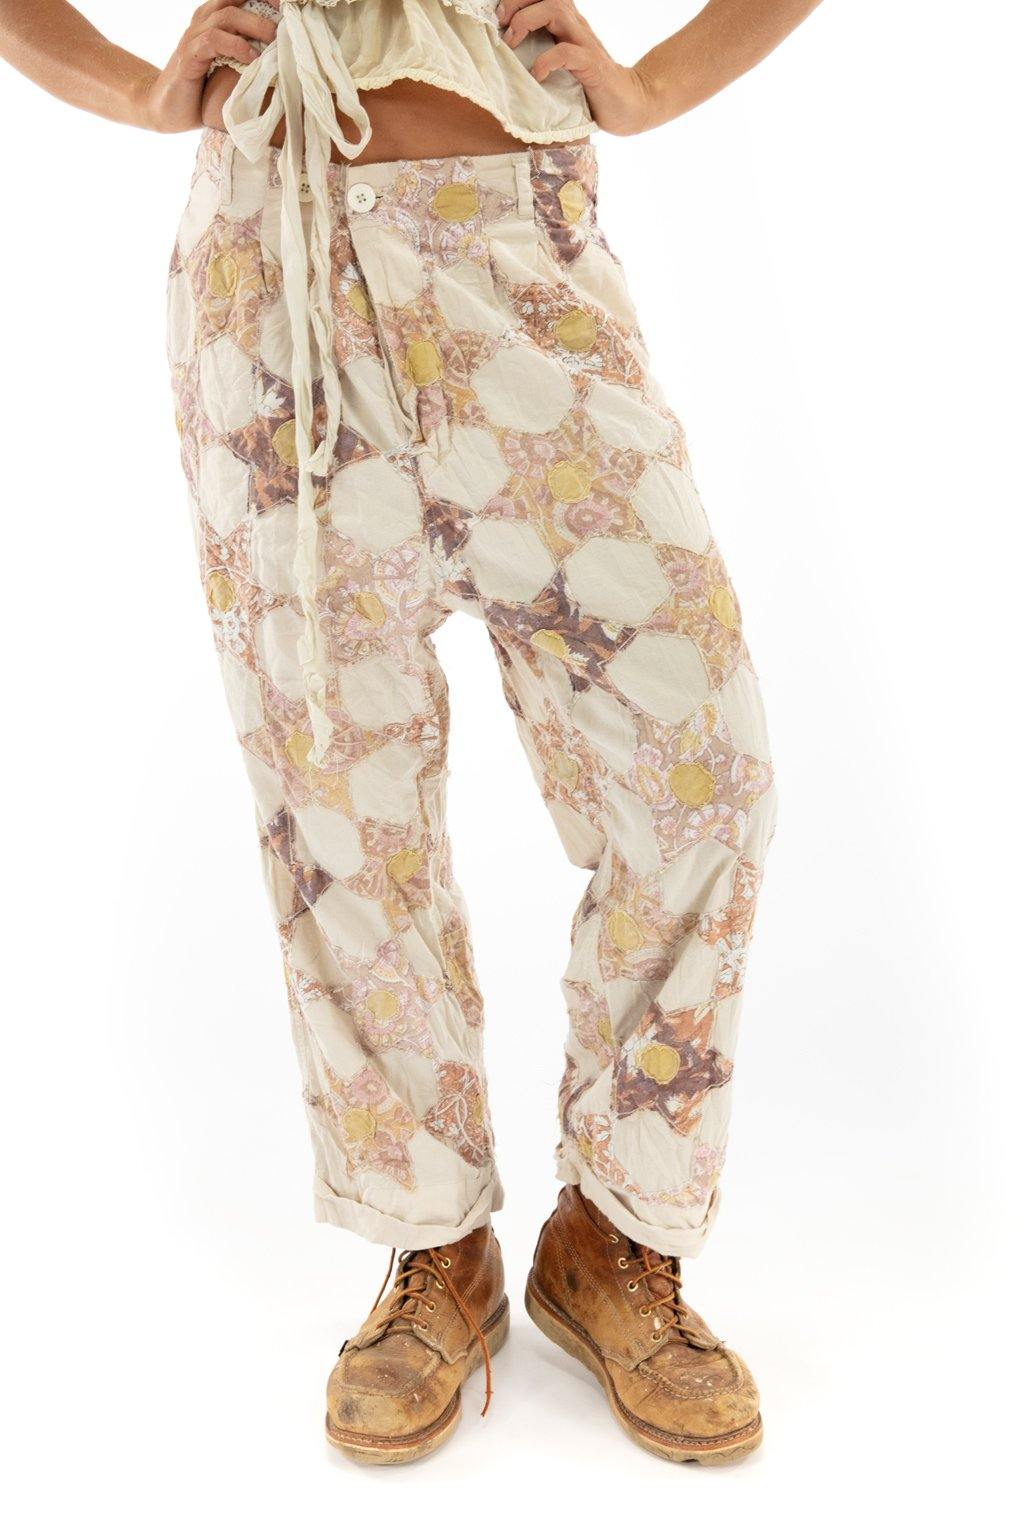 Magnolia Pearl Quiltwork Charmie Trousers Pant 270